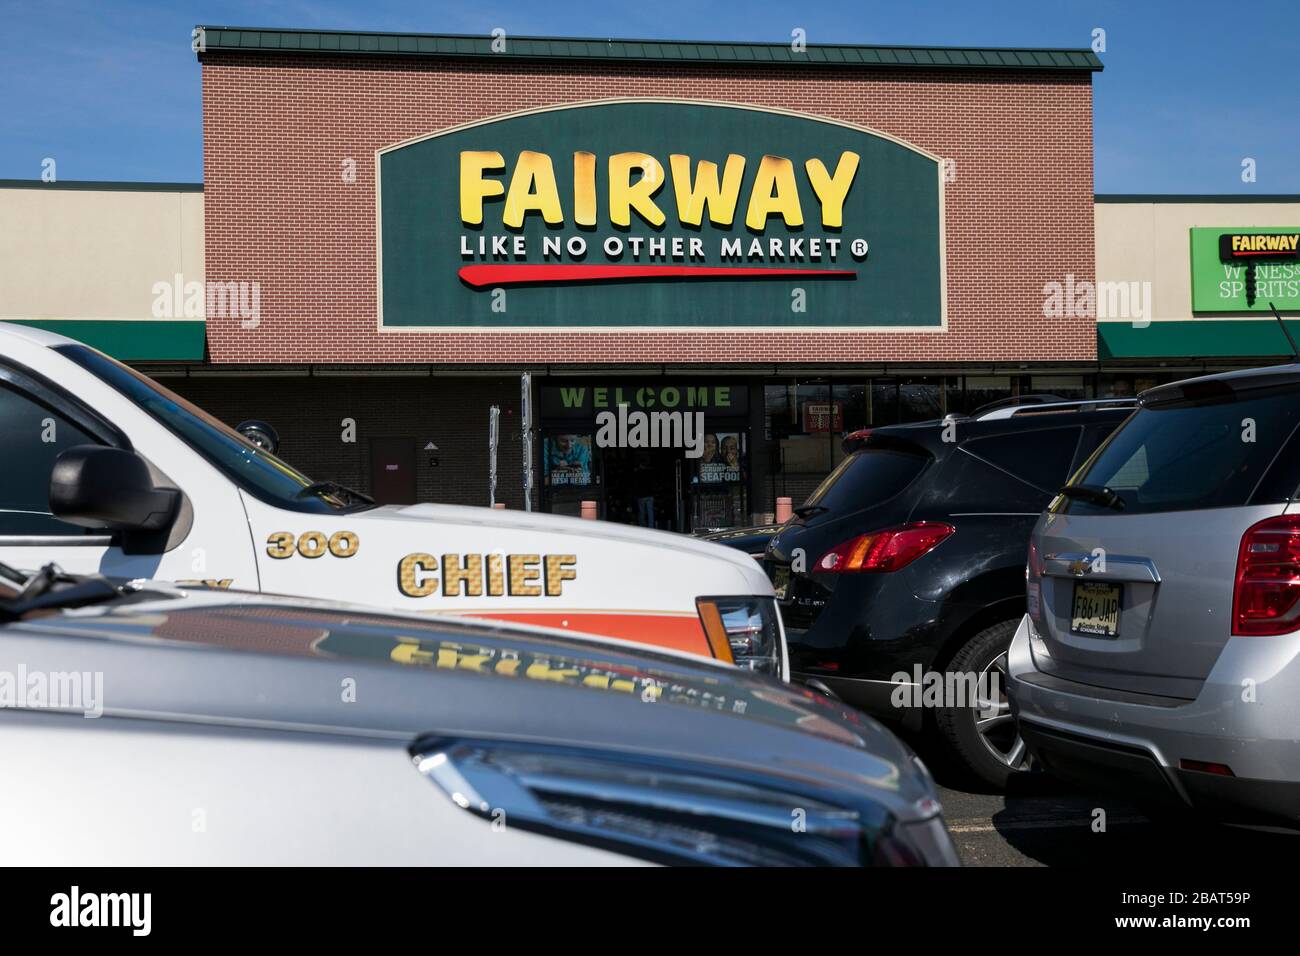 A logo sign outside of a Fairway Market retail grocery store location in Woodland Park, New Jersey, on March 23, 2020. Stock Photo